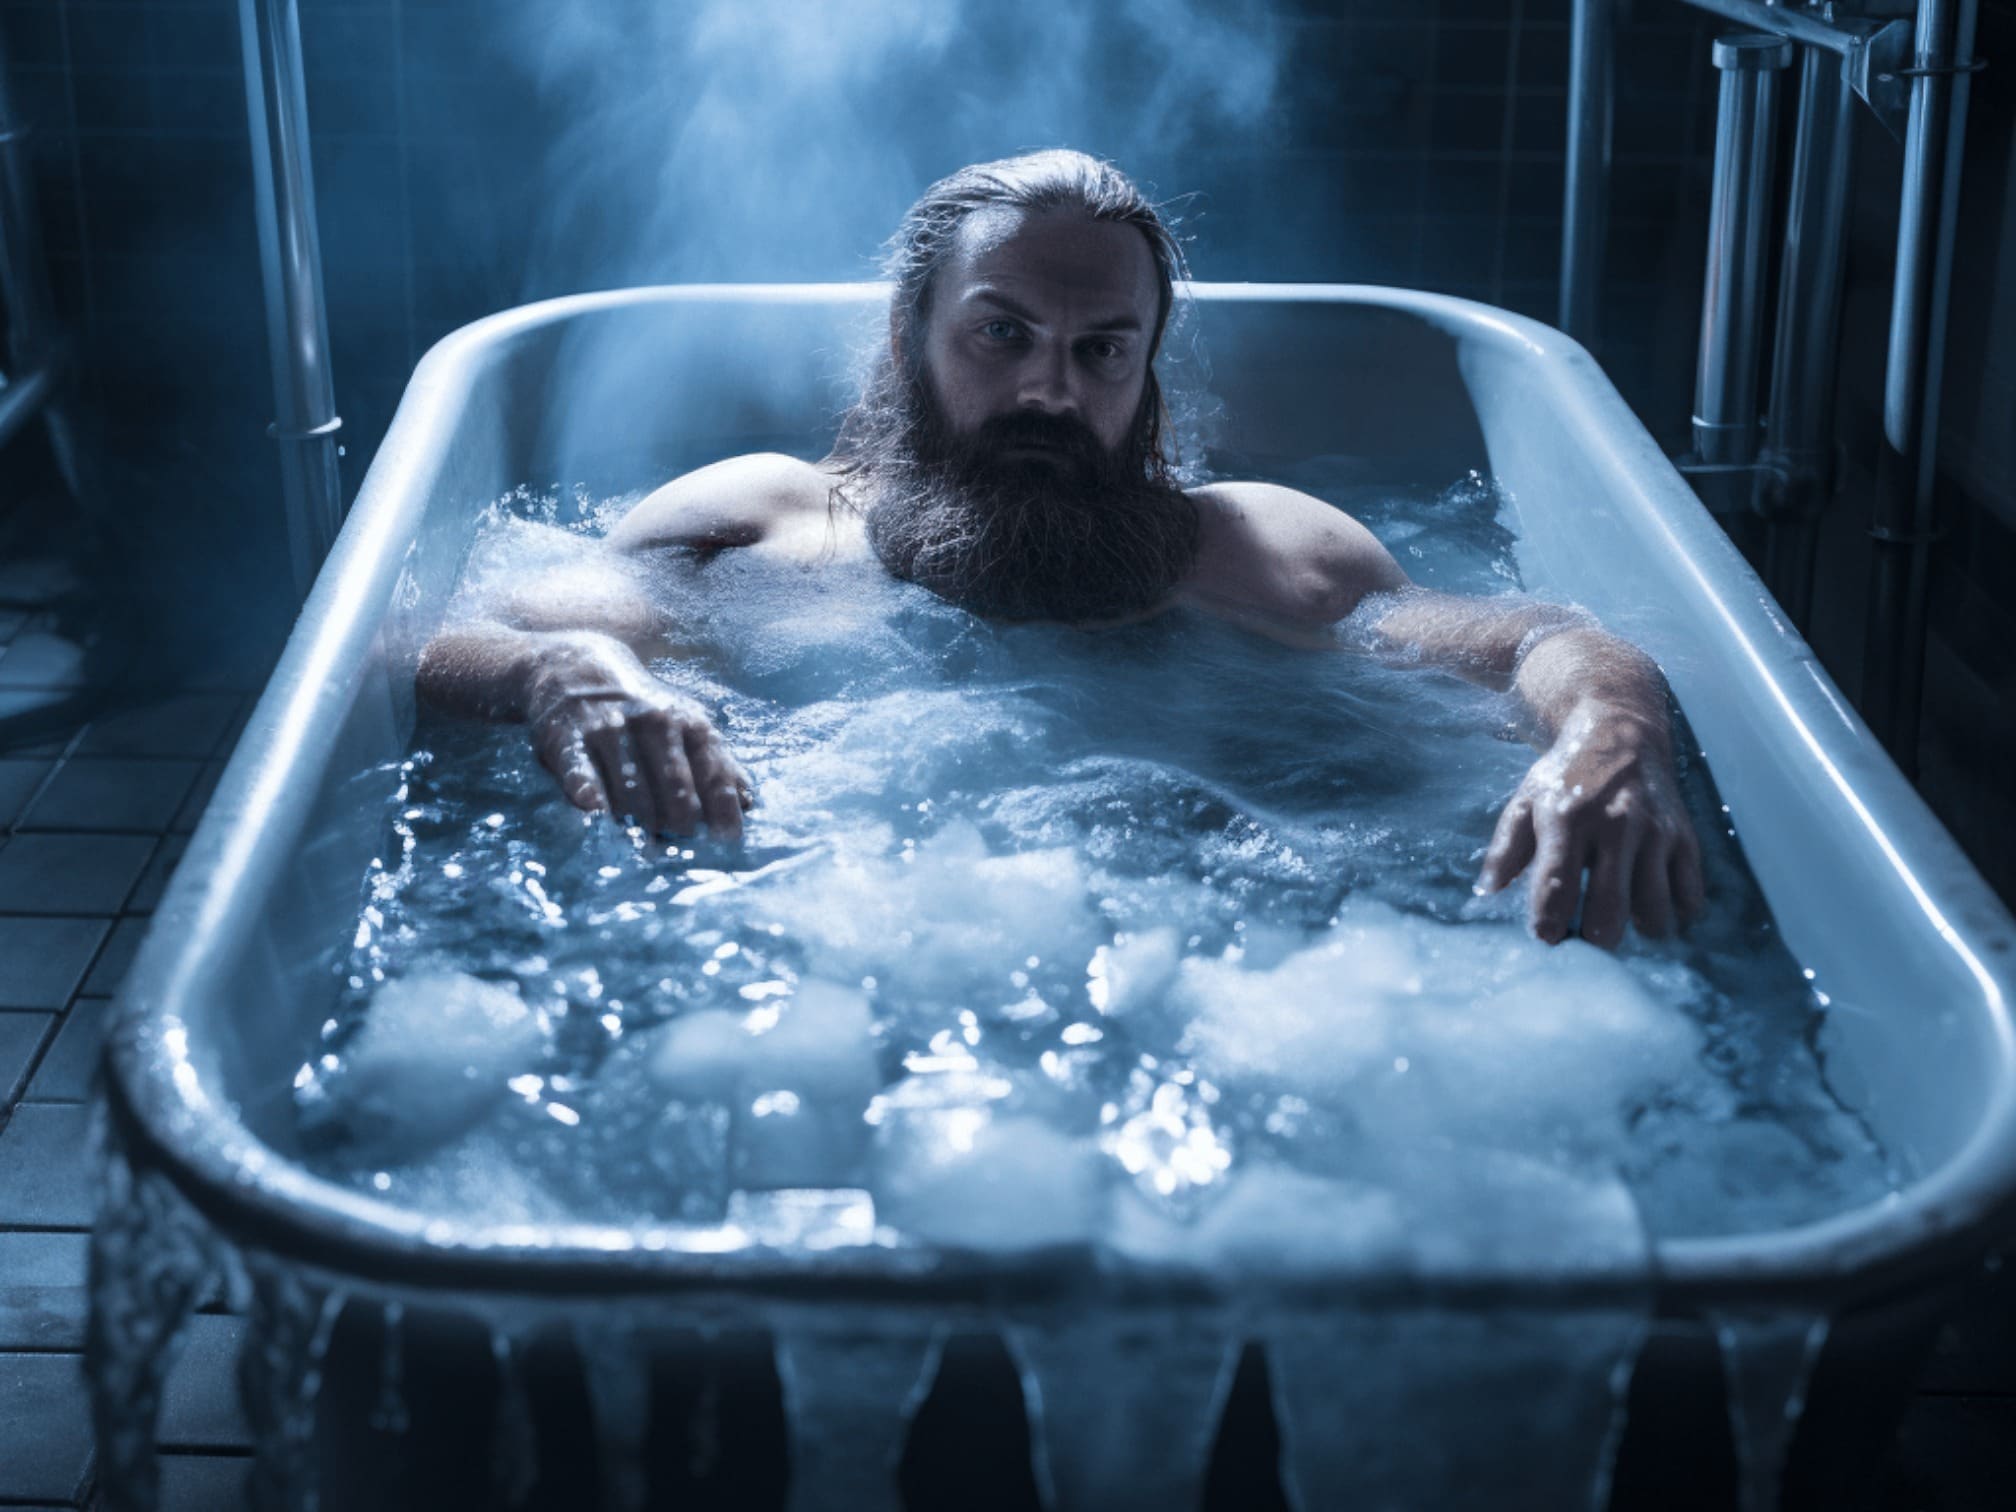 How long should you stay in an ice bath?